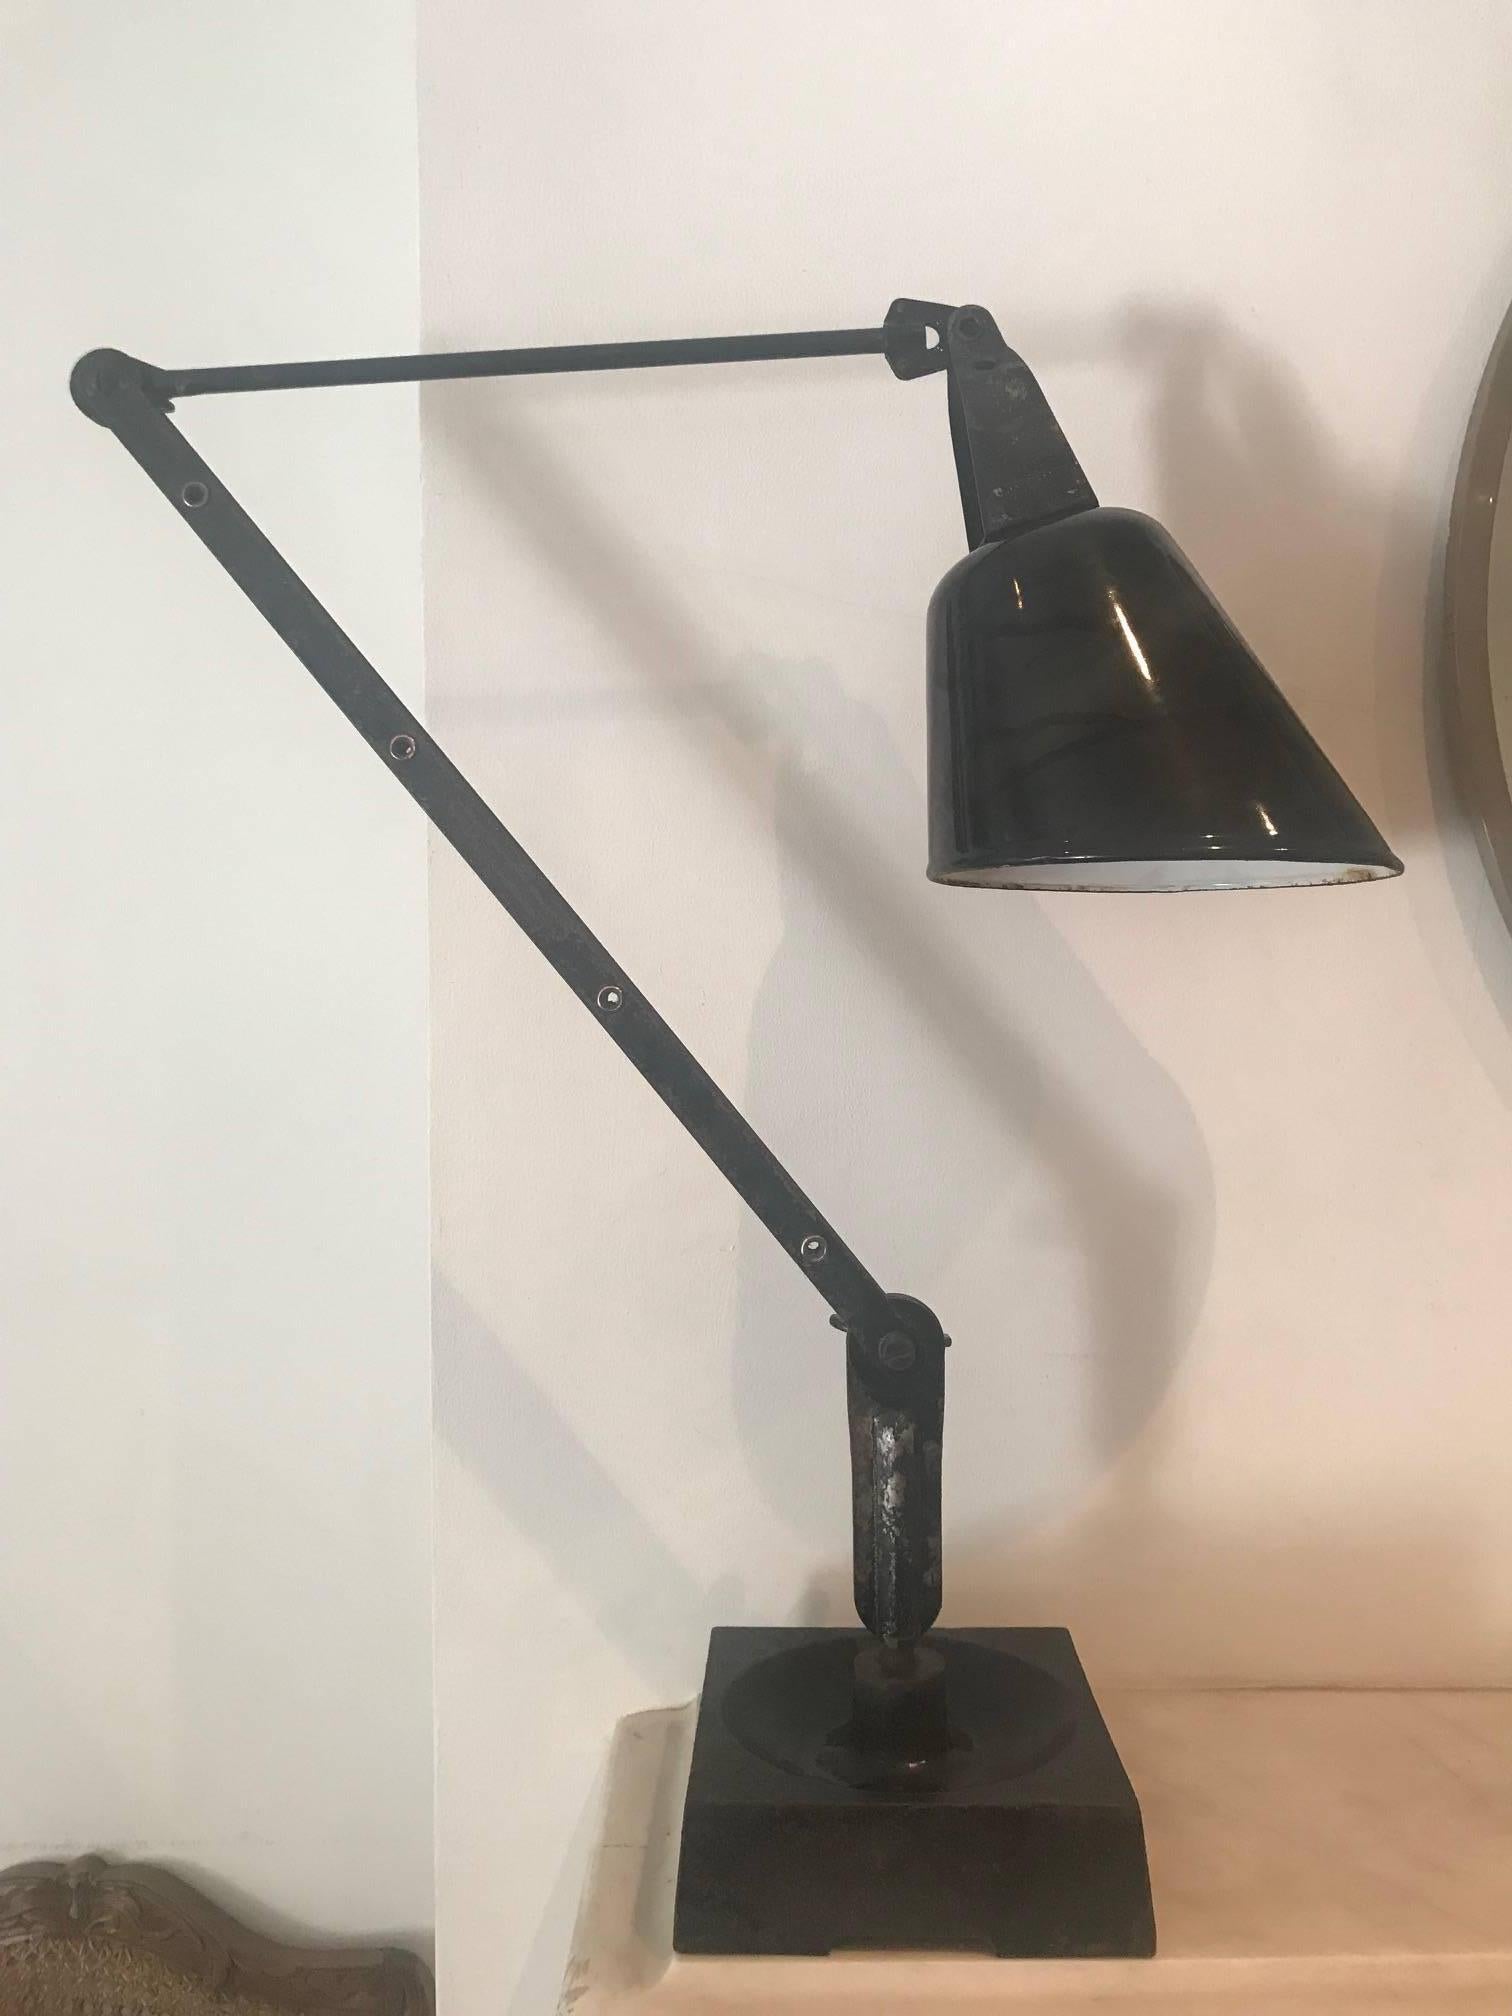 Offered by Caroline de Kerangal an original Walligraph black metal on cast iron base anglepoise desk lamp. English c.1930's. Original shade. Can be sold as is or rewired. It is adjustable so the measurements are approximate.